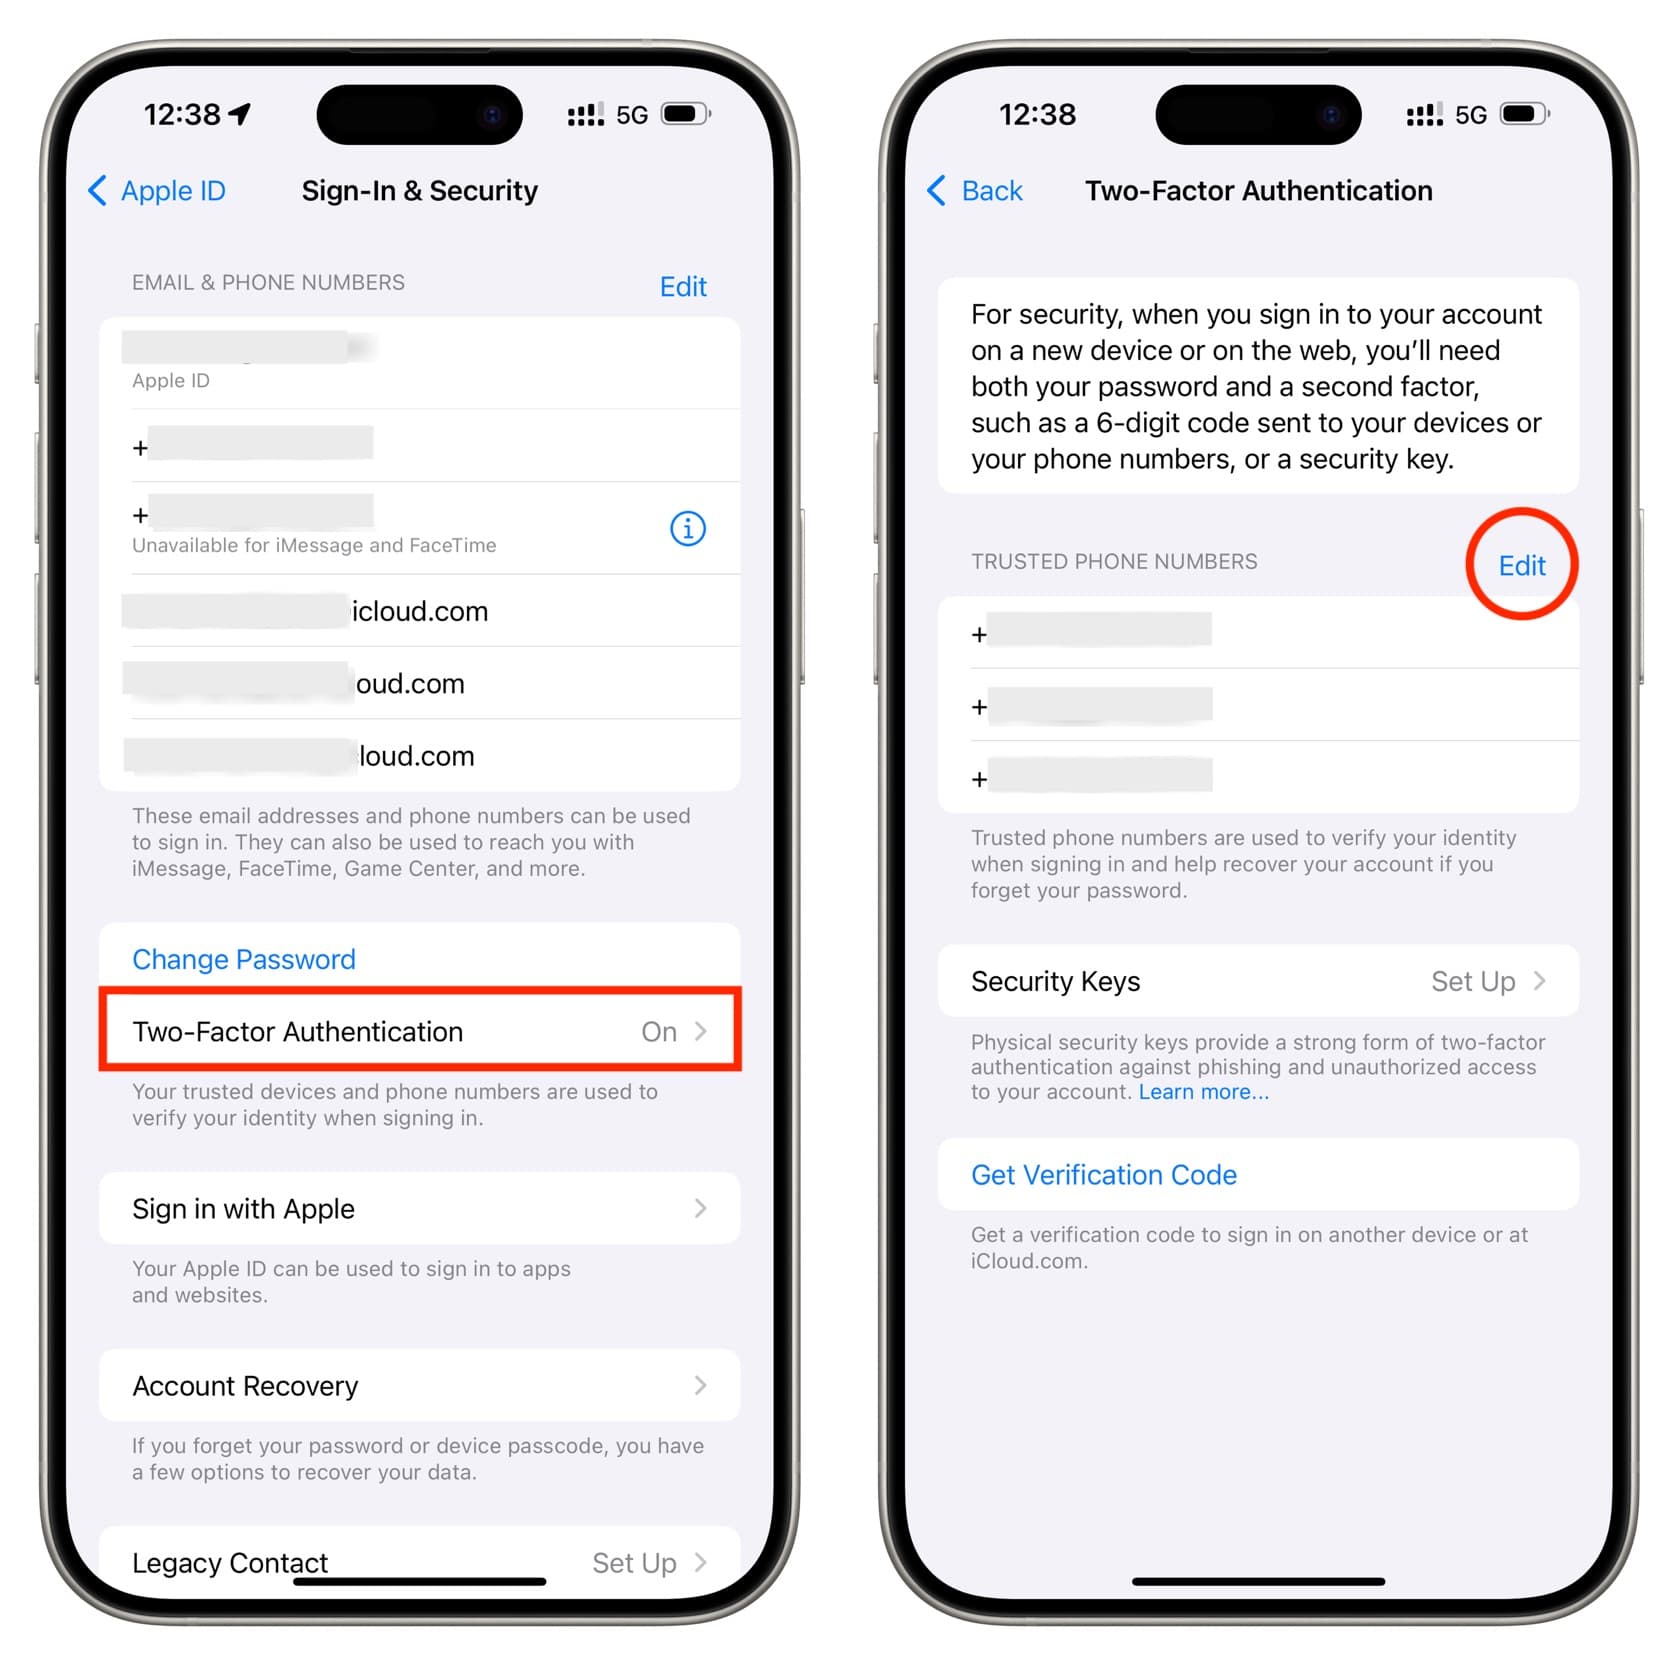 Tap Two-Factor Authentication and tap Edit next to Trusted Phone Numbers